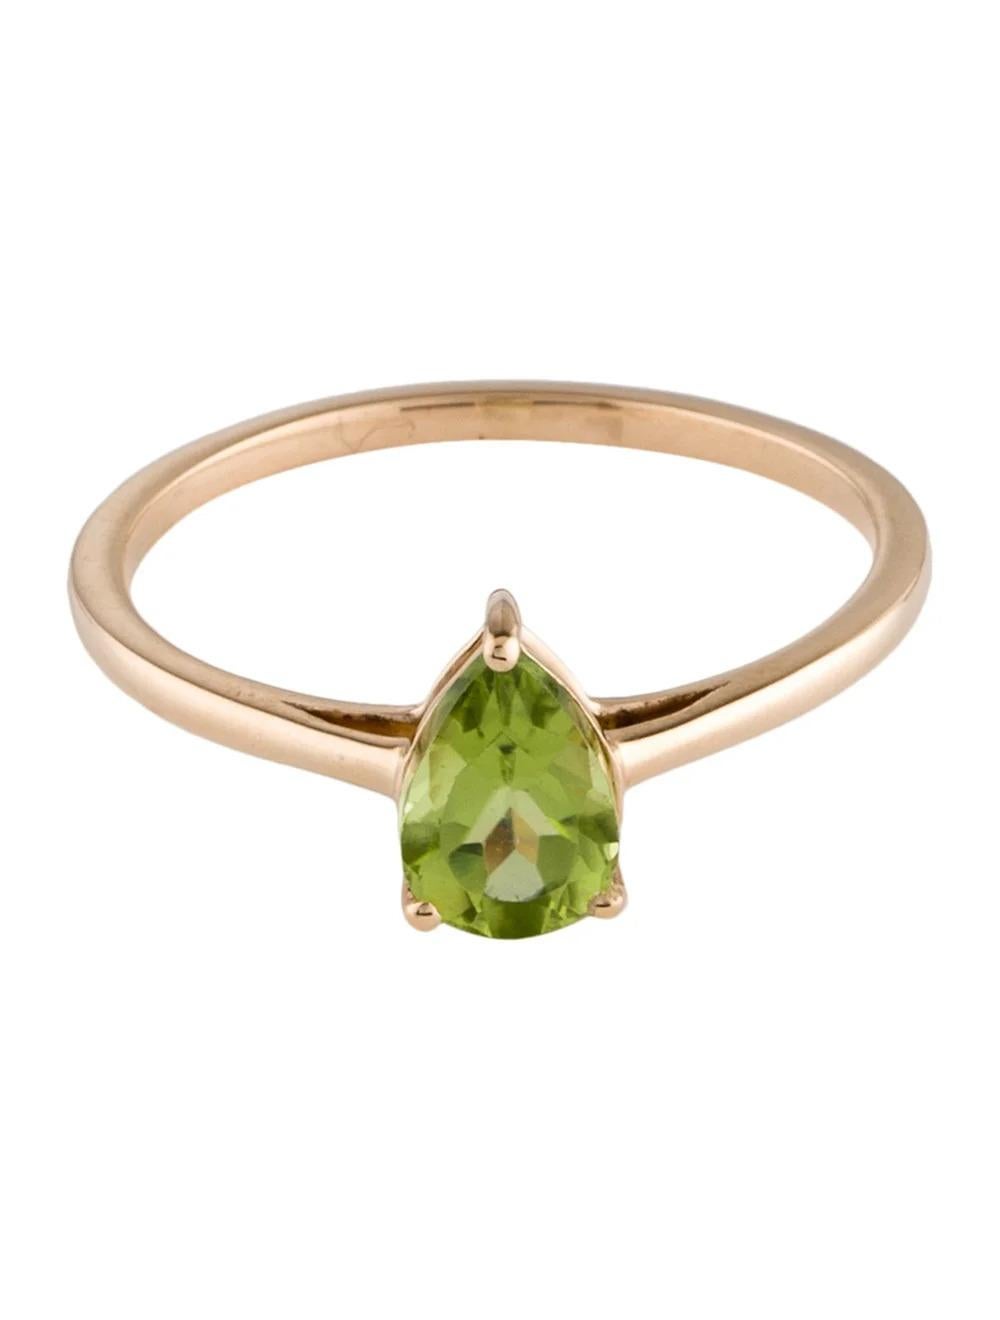 Pear Cut 14K Peridot Cocktail Ring Size 6.75 - Green Gemstone, Statement Jewelry For Sale